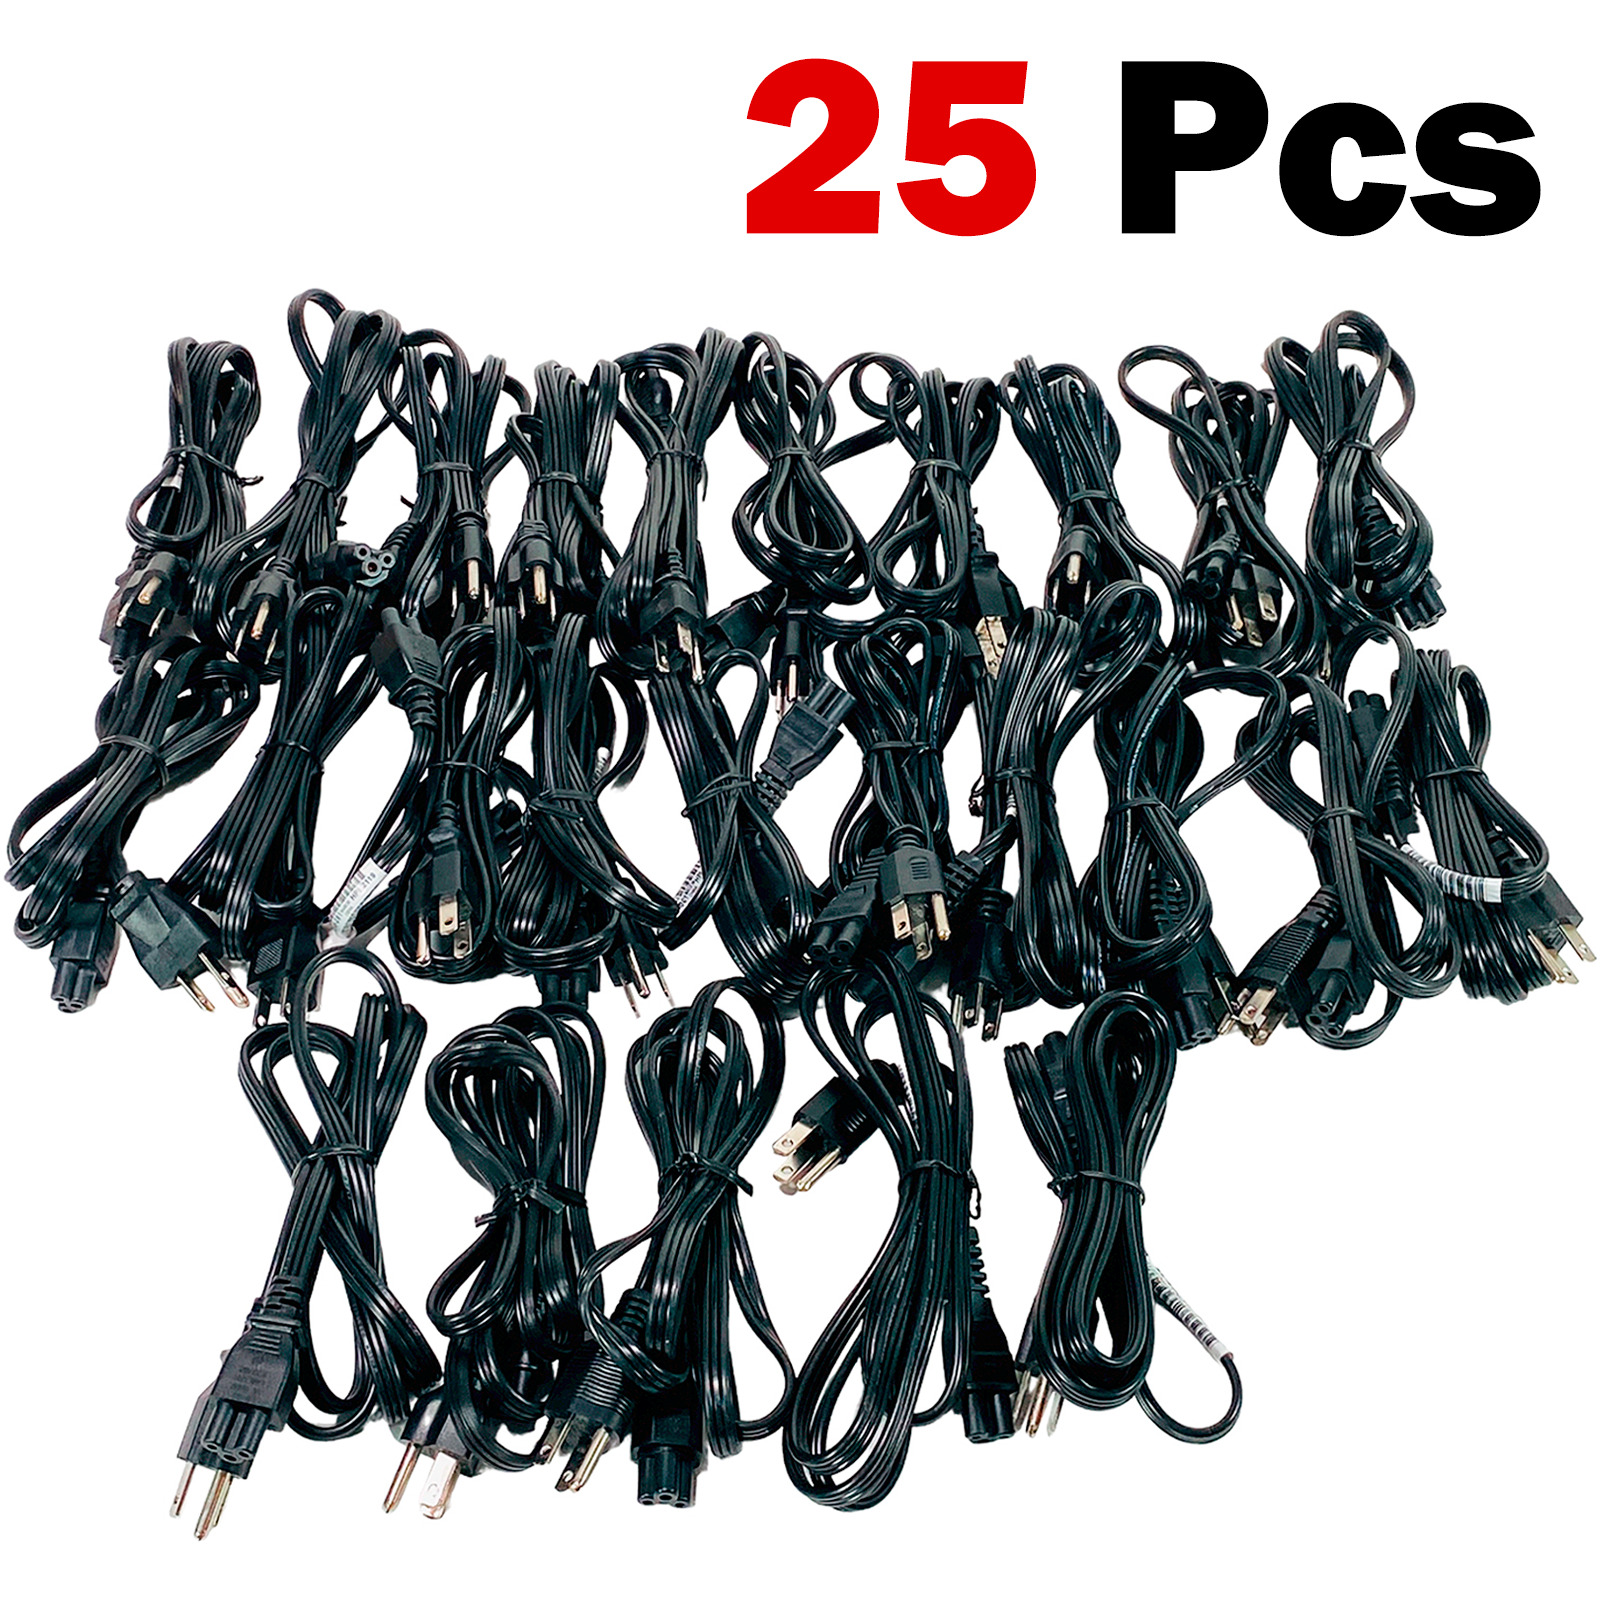 Branded OEM LOT USED 6ft 3-Prong Mickey Mouse AC Power Cord HIGH QUALITY Grade A